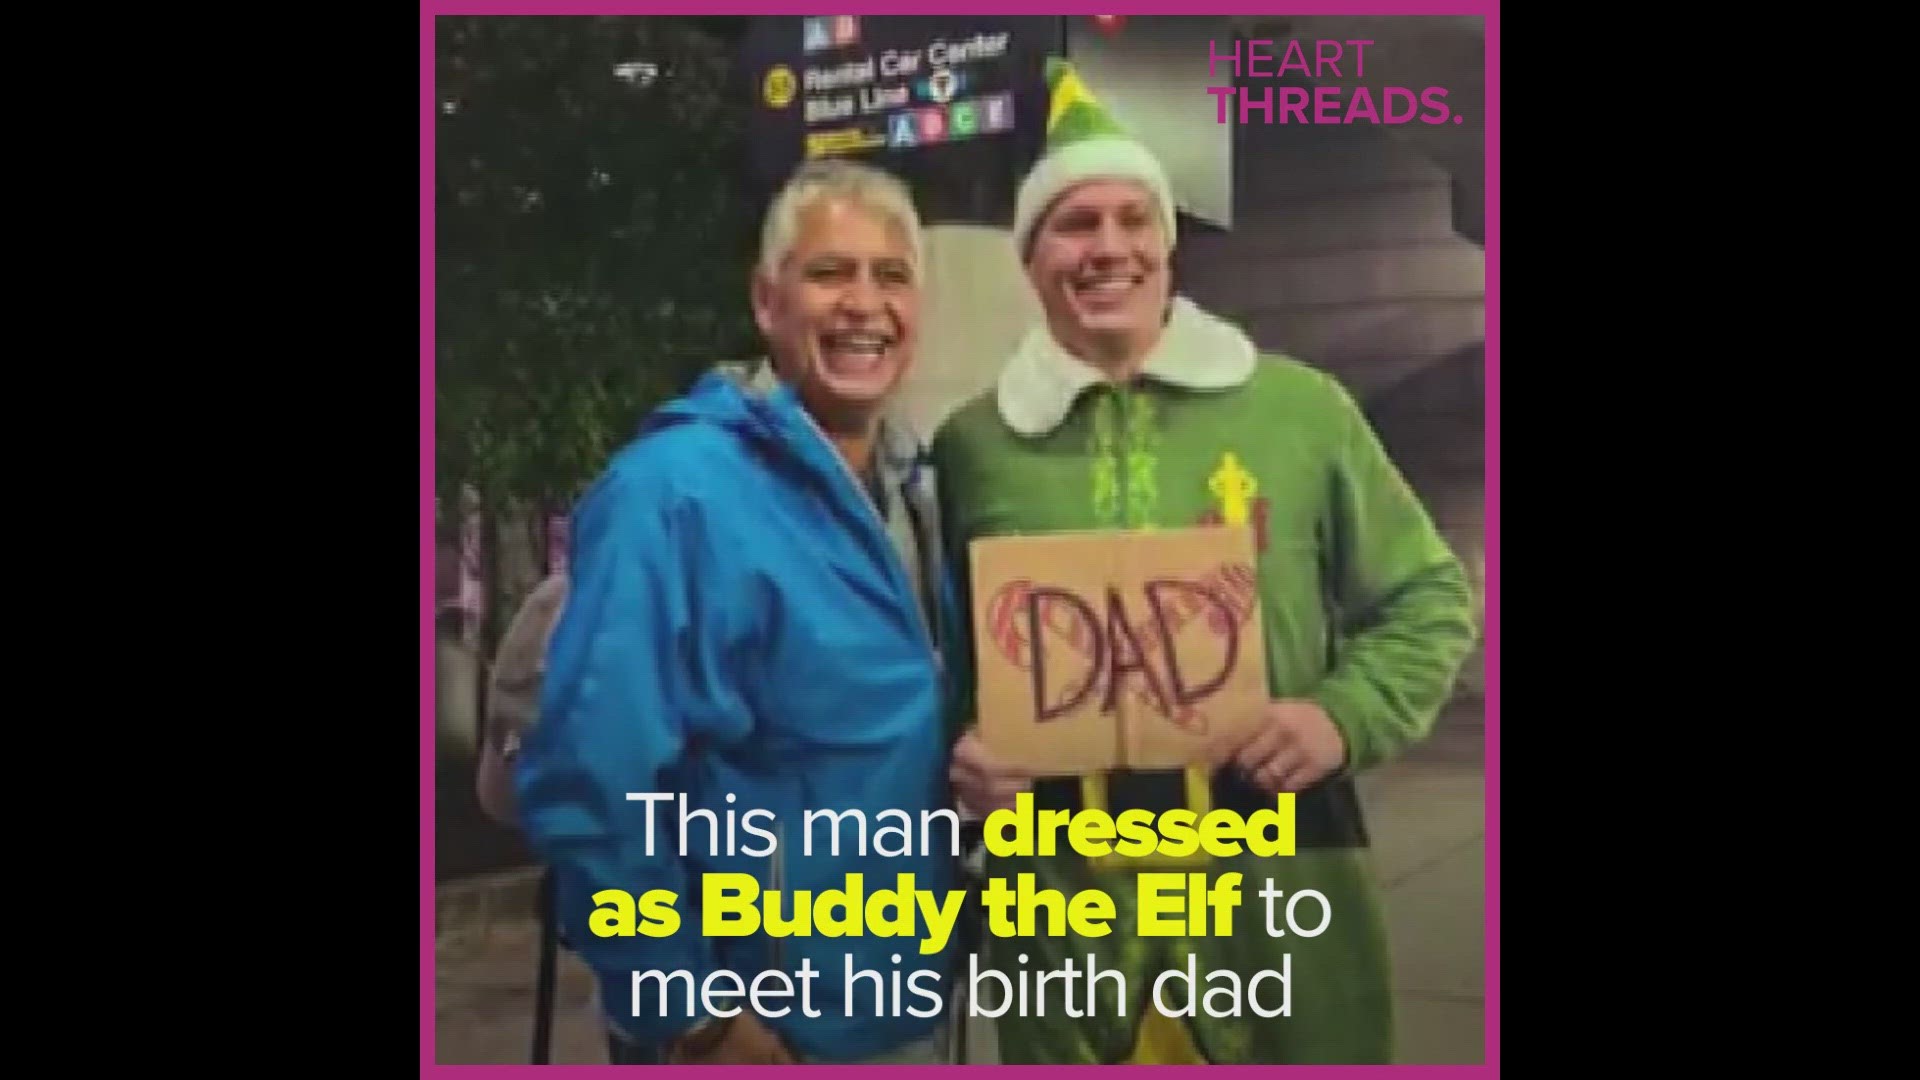 In a scene straight from the movies, this man dresses as Buddy the Elf to meet his biological father for the first time.